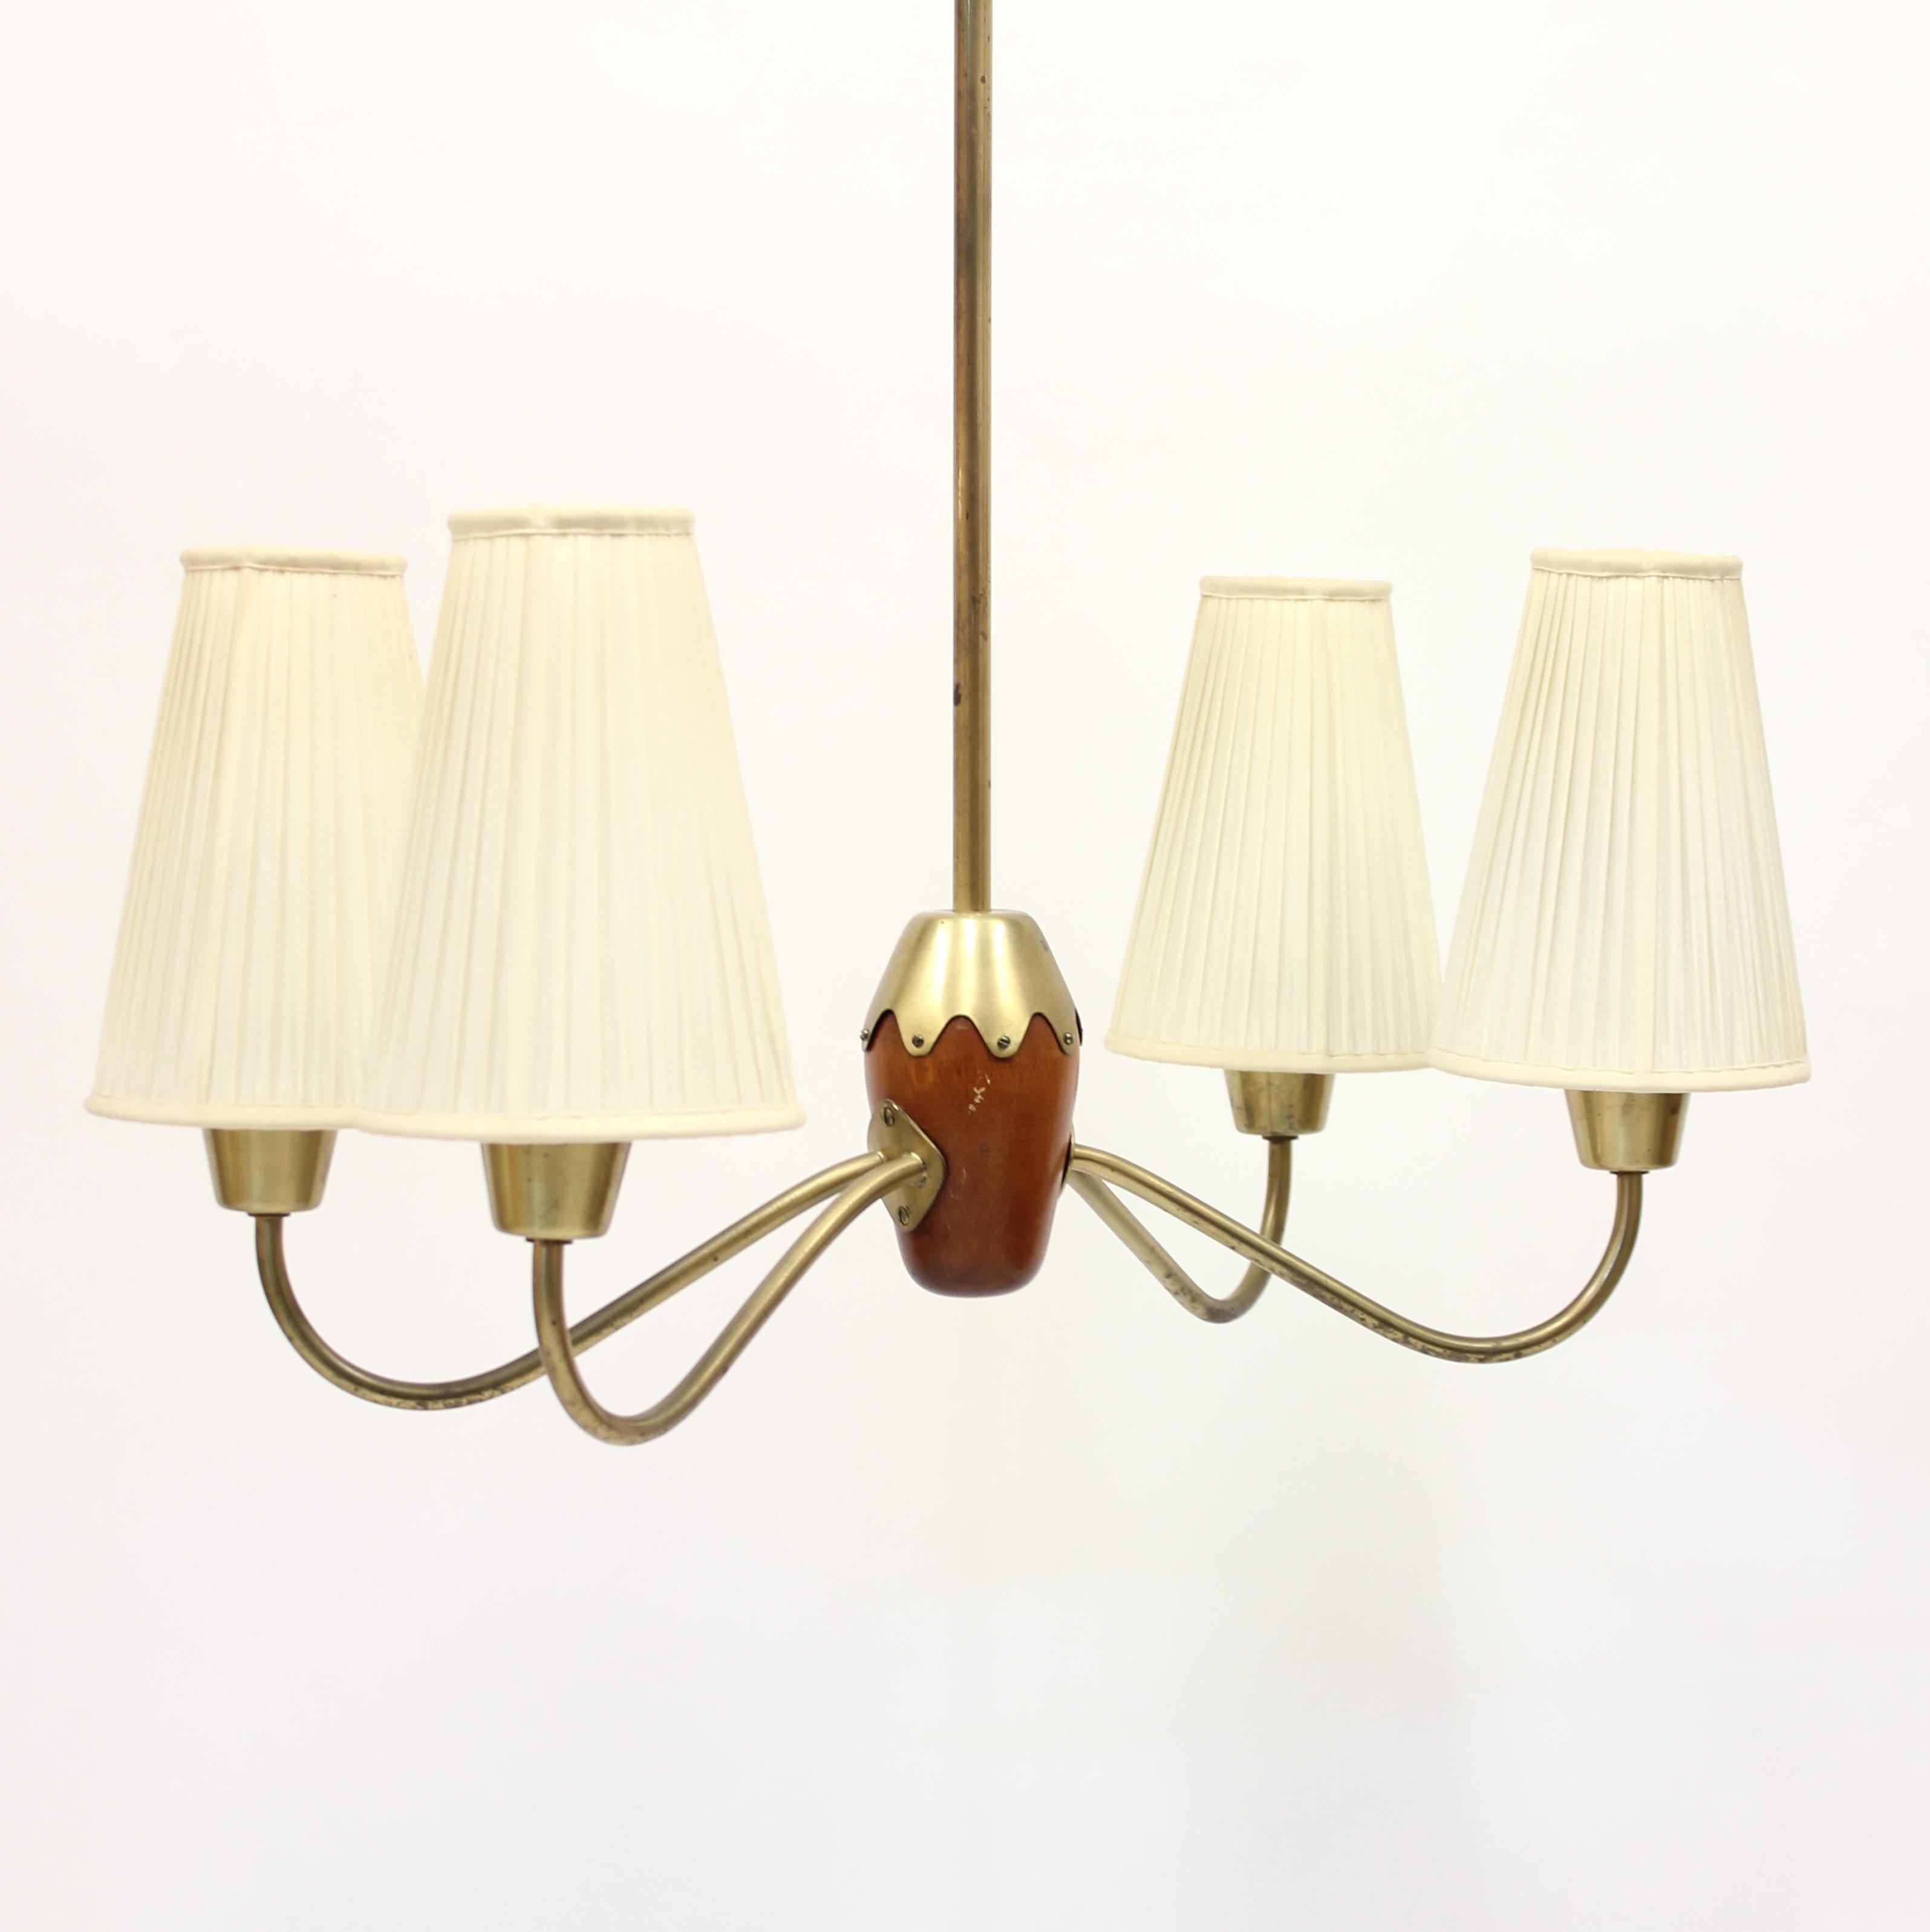 Scandinavian Modern 4-Light Ceiling Lamp, Attributed to ASEA, 1950s